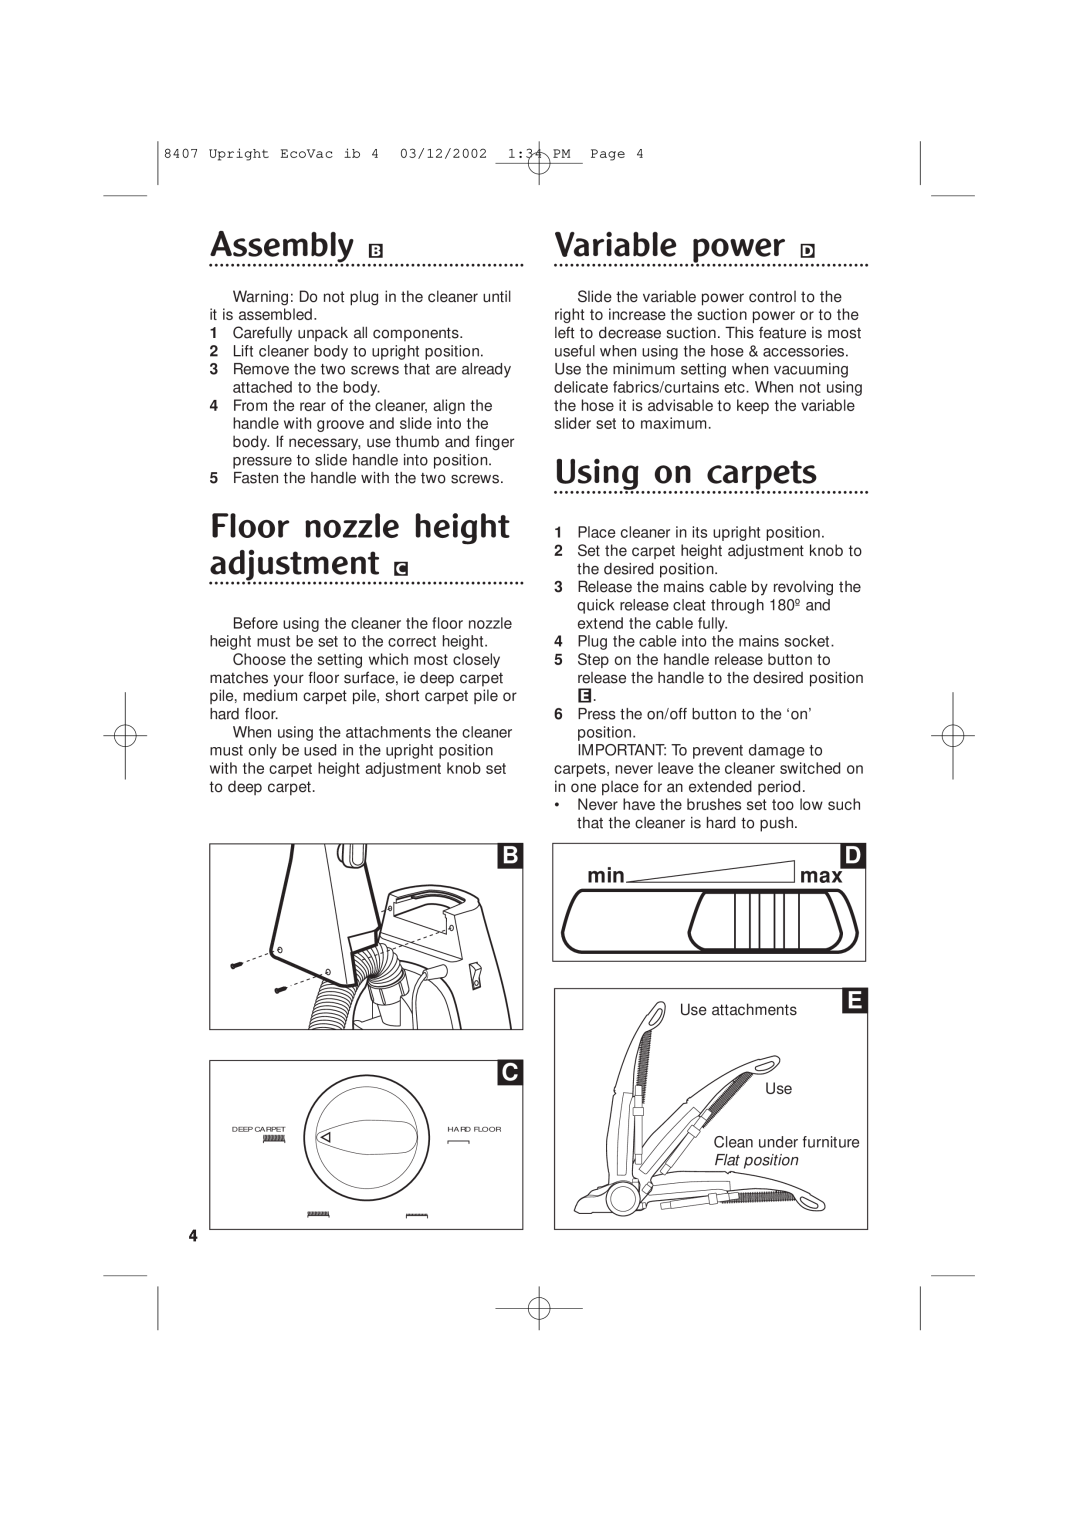 Morphy Richards Ecovac vacuum cleaner Assembly B, Floor nozzle height adjustment C, Variable power D, Using on carpets 